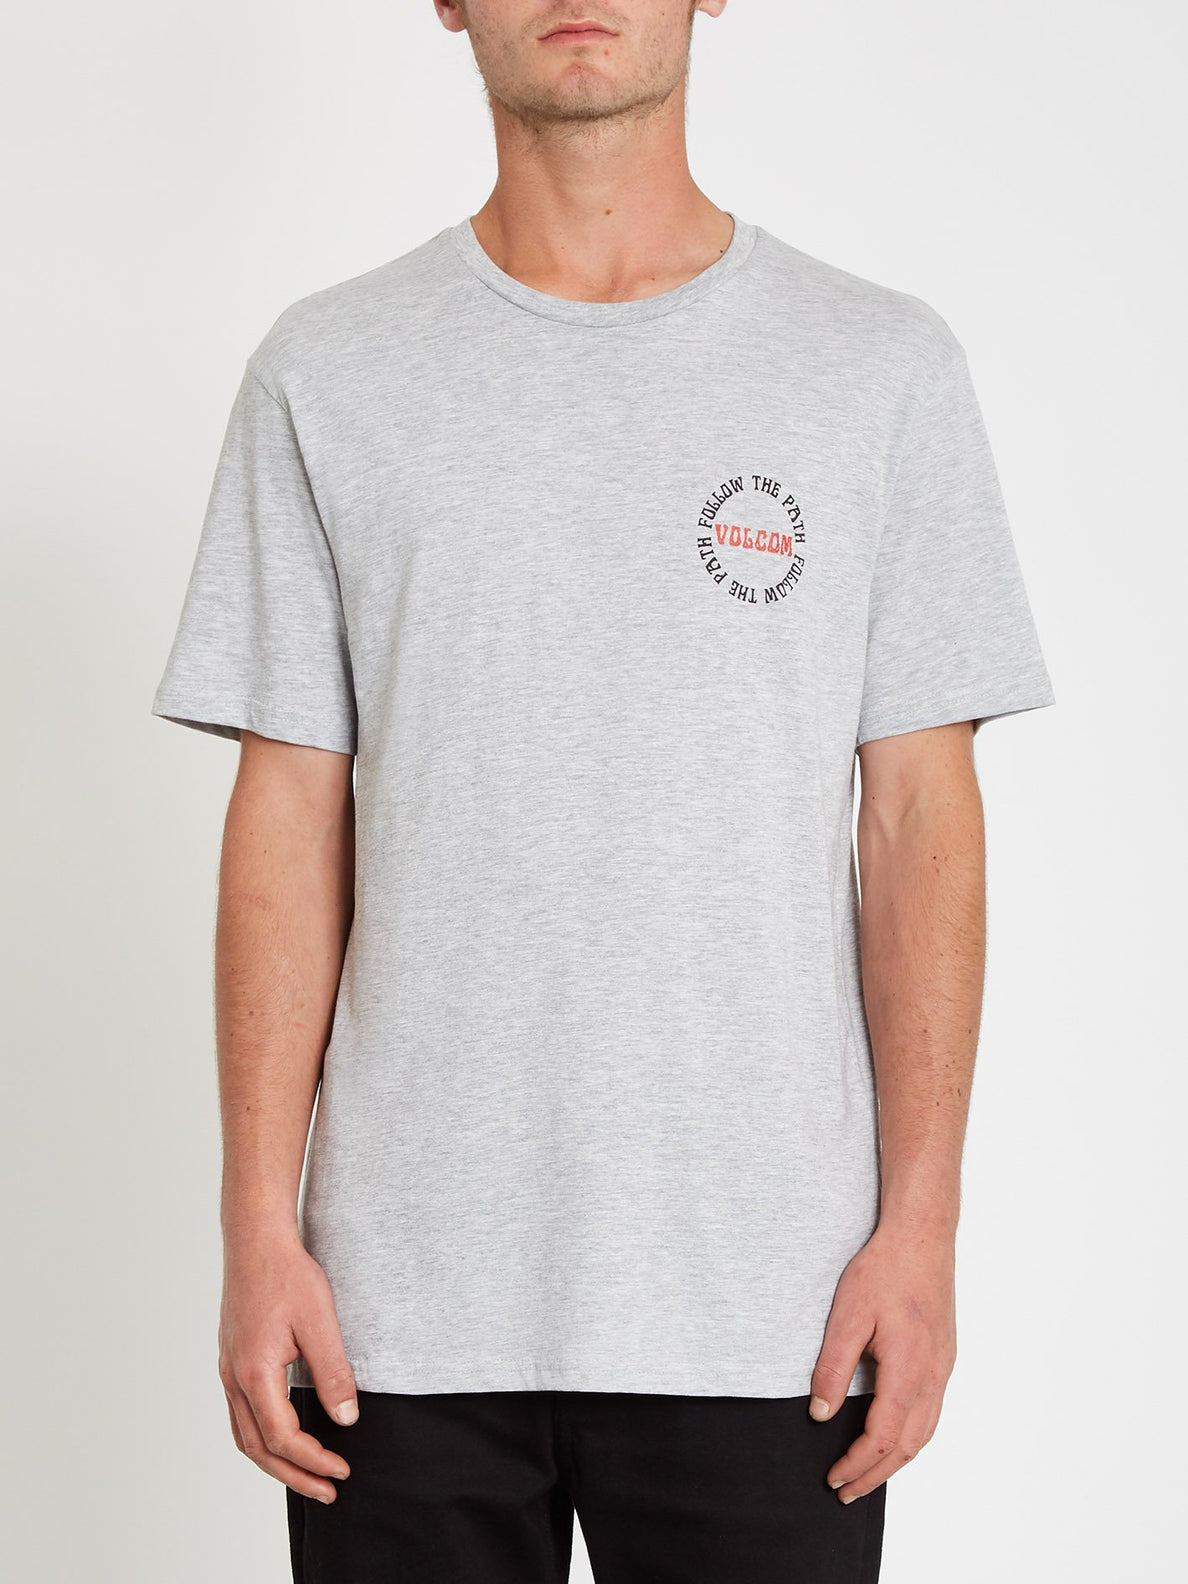 Dither T-shirt - Heather Grey (A3512119_HGR) [3]